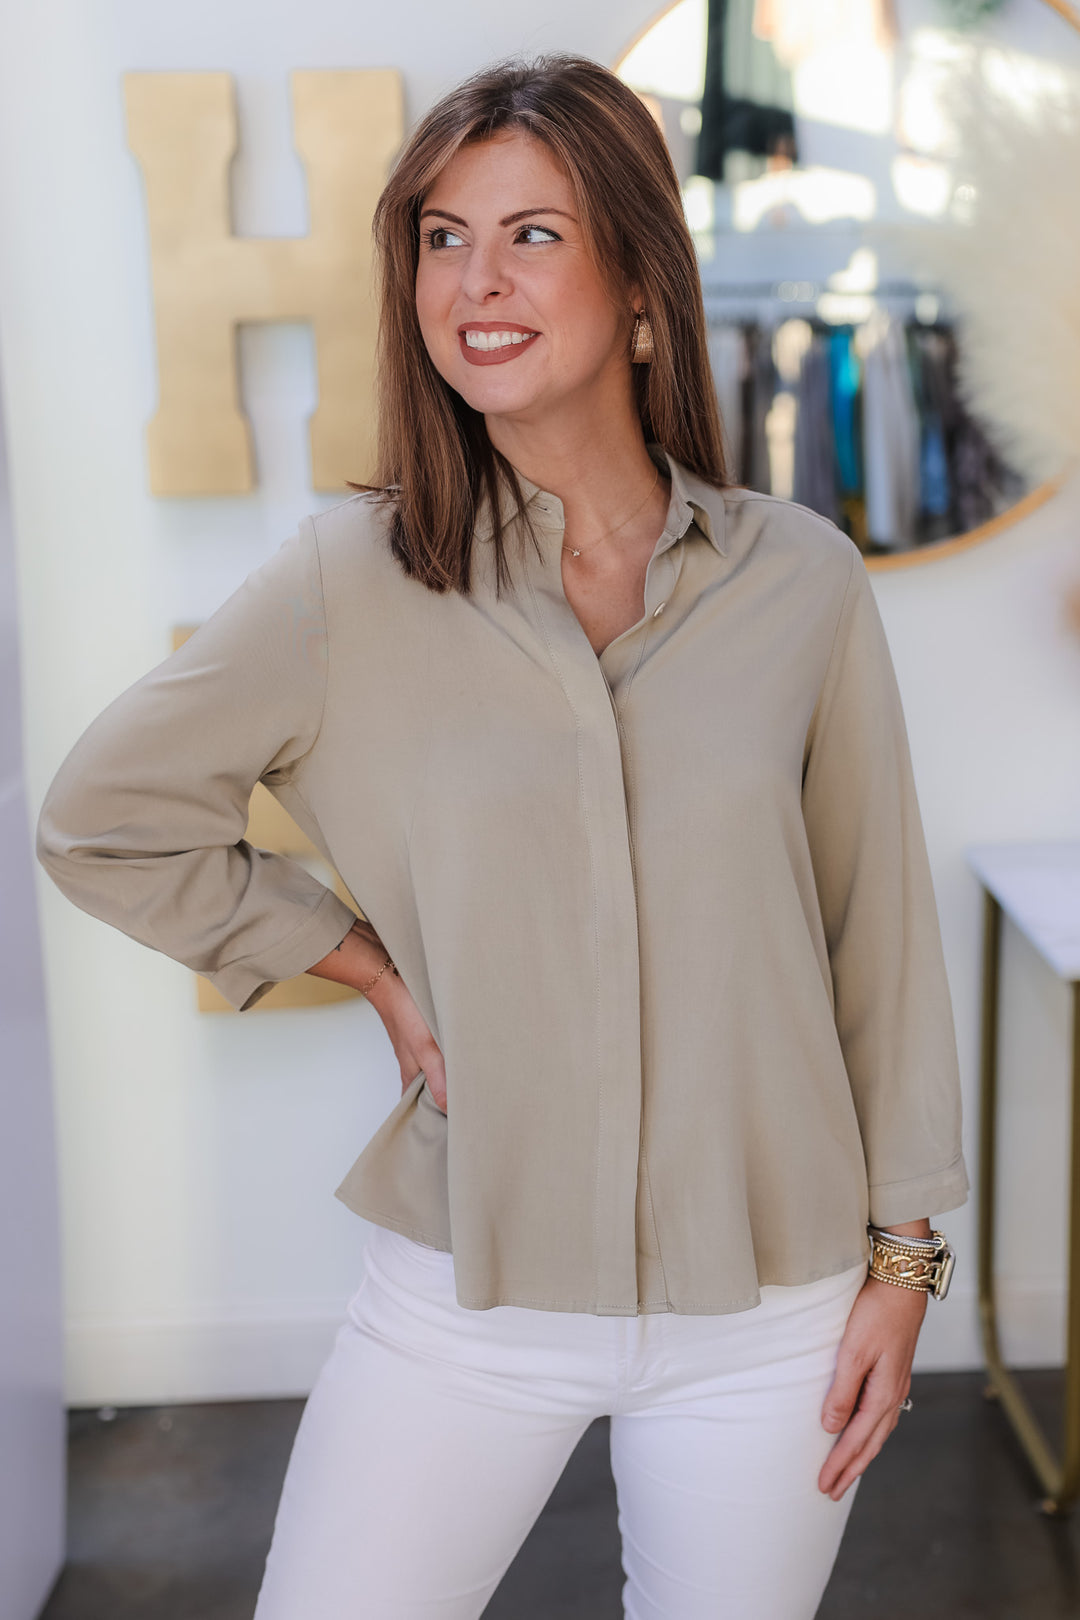 A brunette woman standing in a shop wearing a sage green button down top with white jeans.